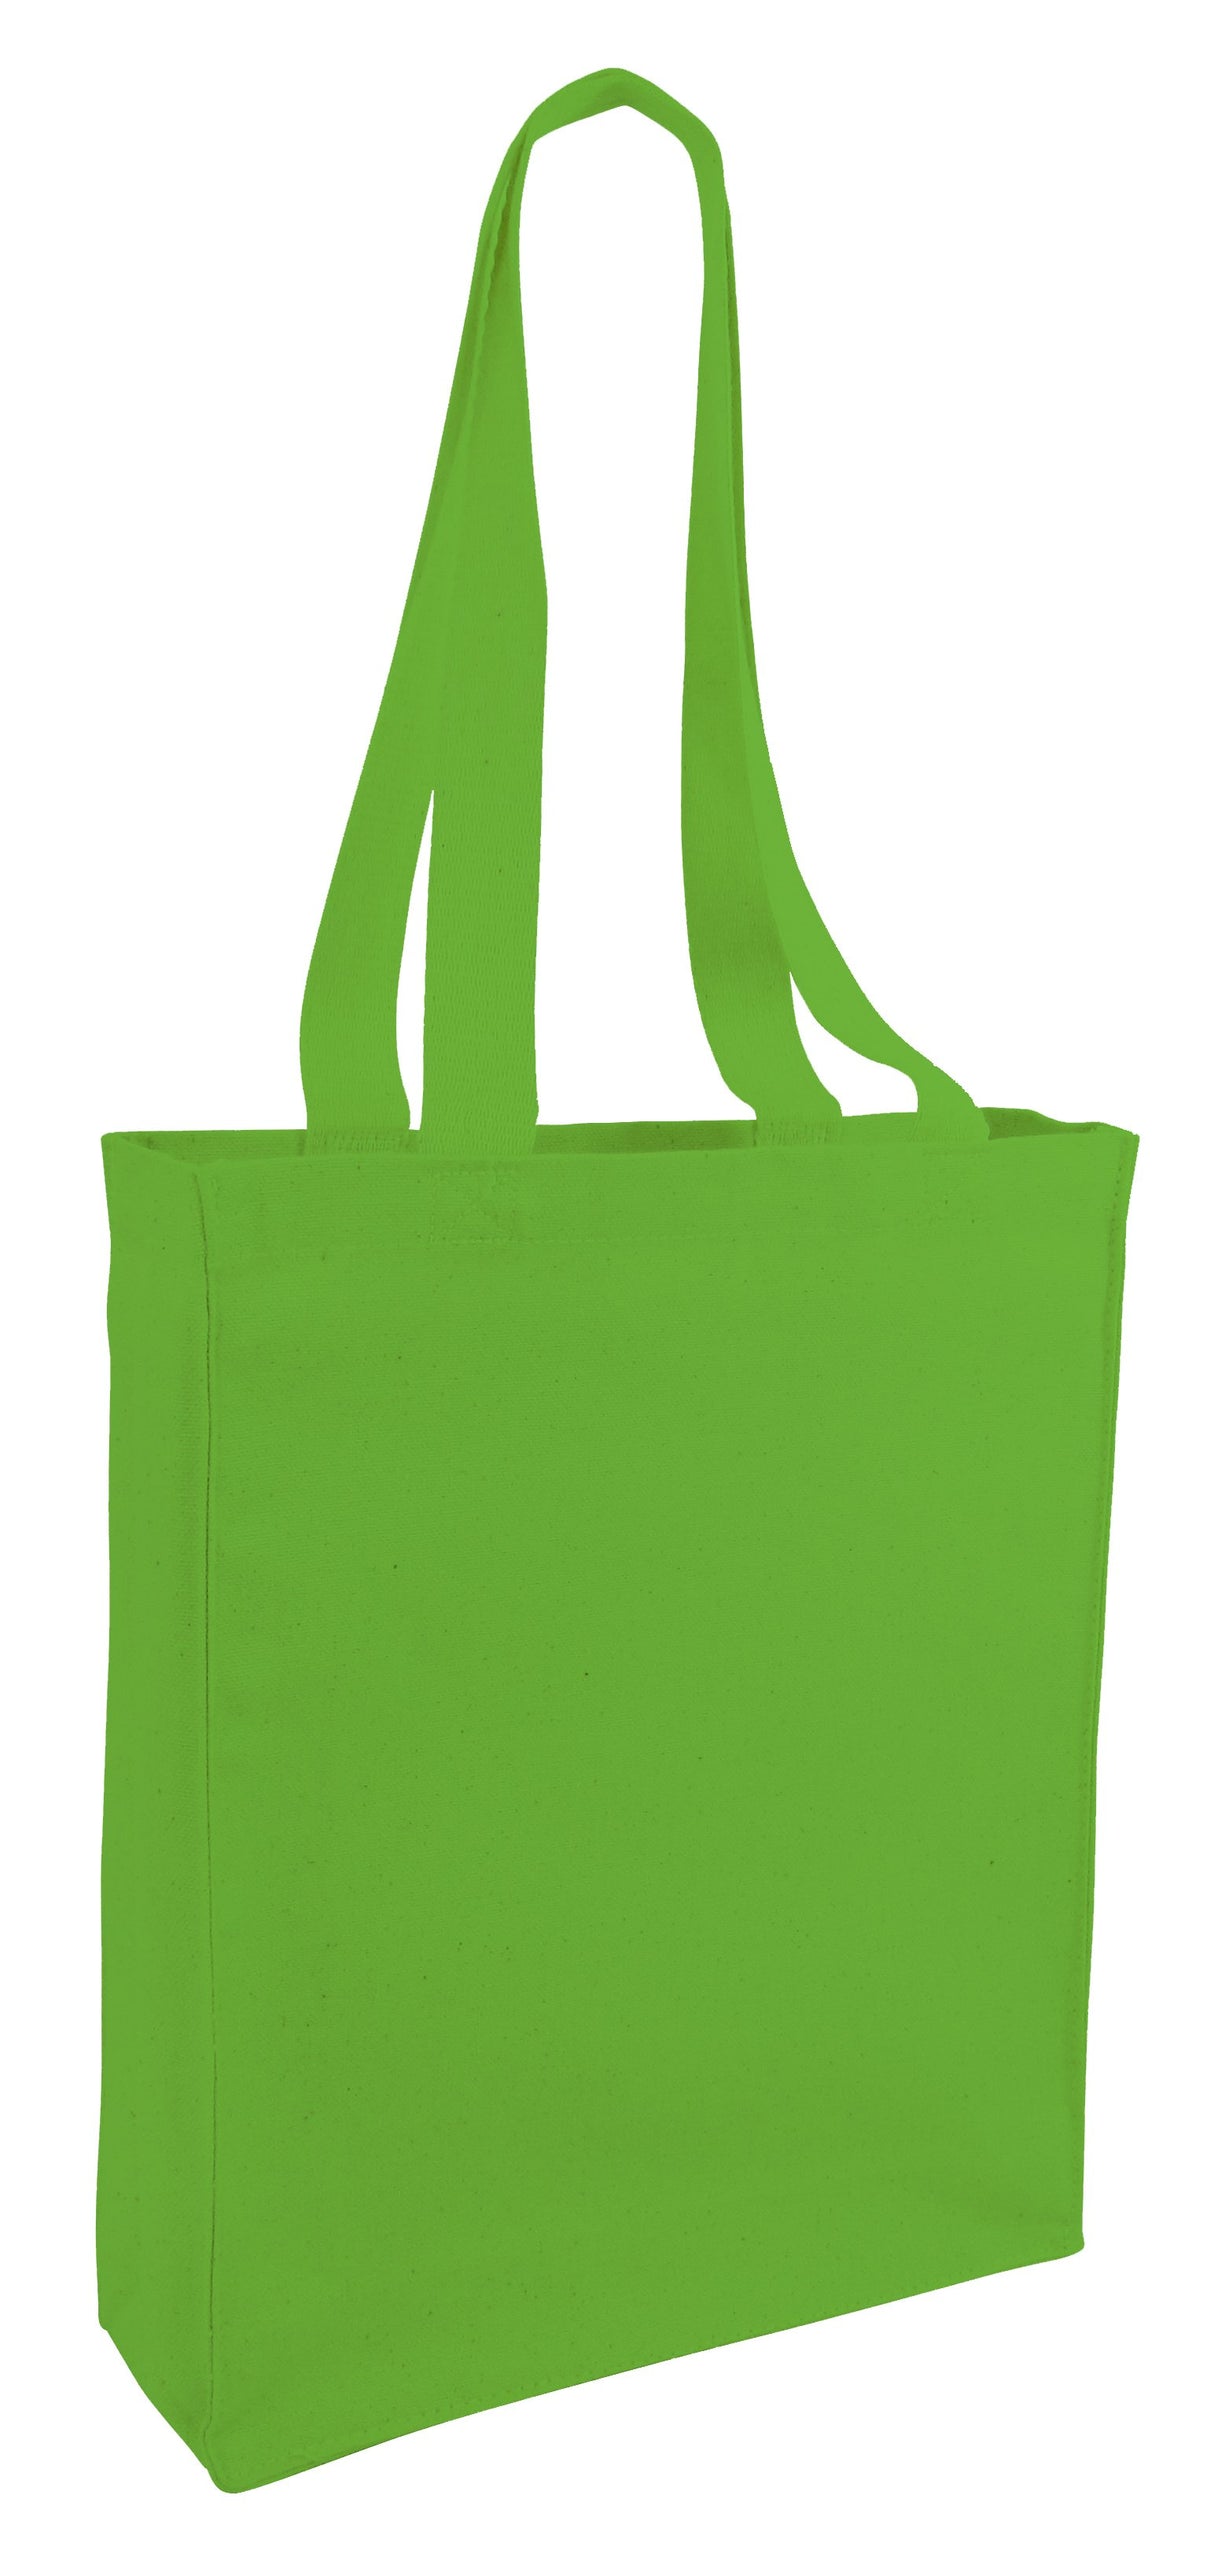 12 ct Affordable Canvas Tote Bag / Book Bag with Gusset - By Dozen